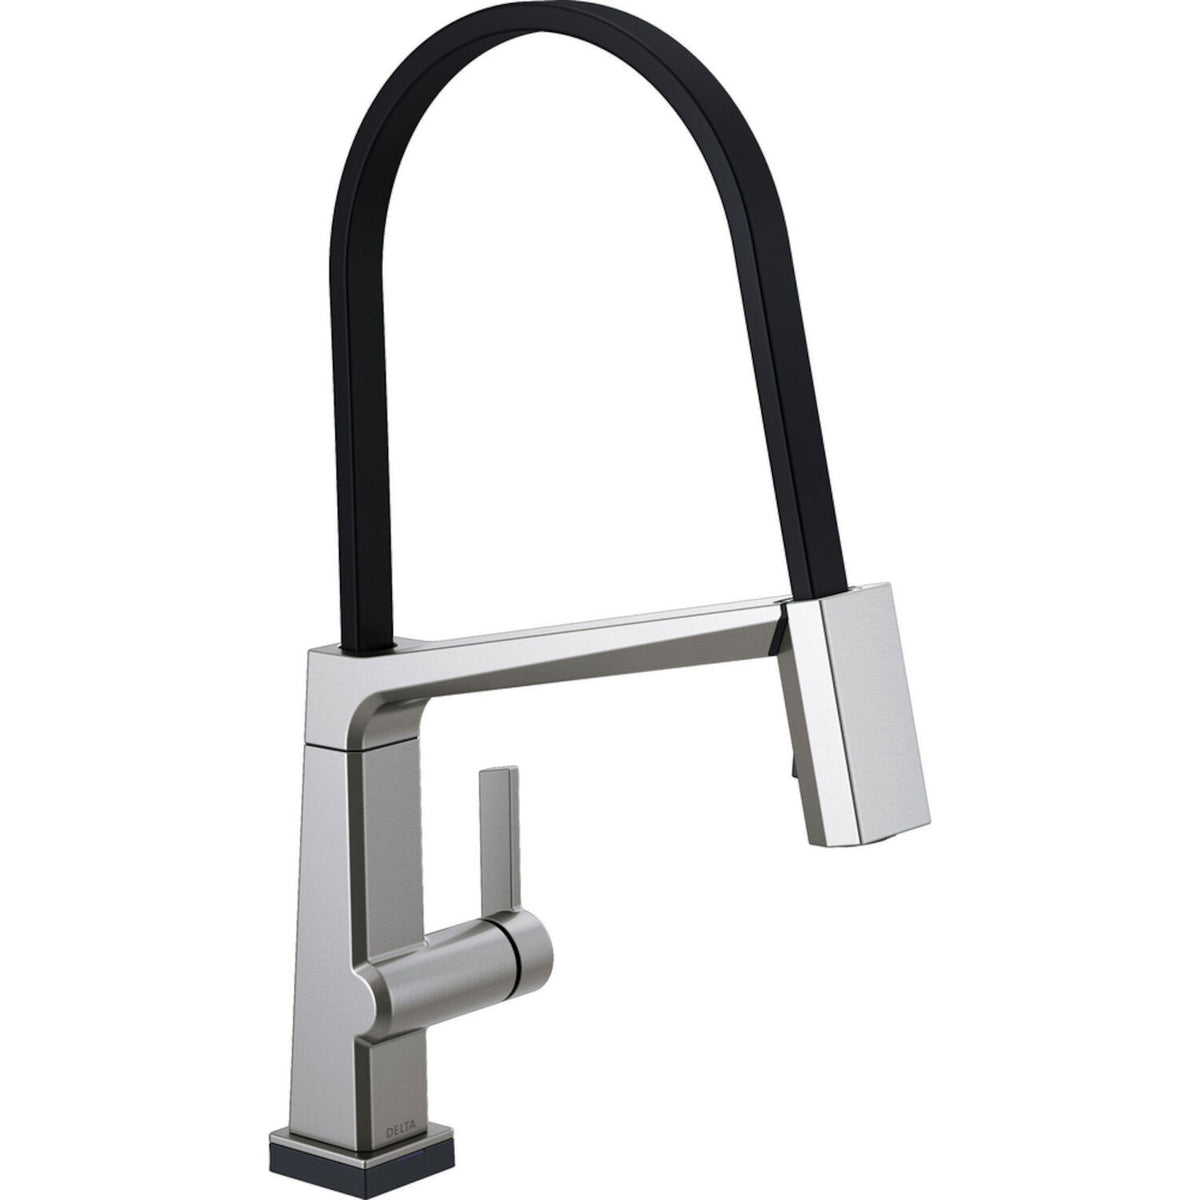 PIVOTAL SINGLE HANDLE EXPOSED HOSE KITCHEN FAUCET WITH TOUCH2O TECHNOLOGY